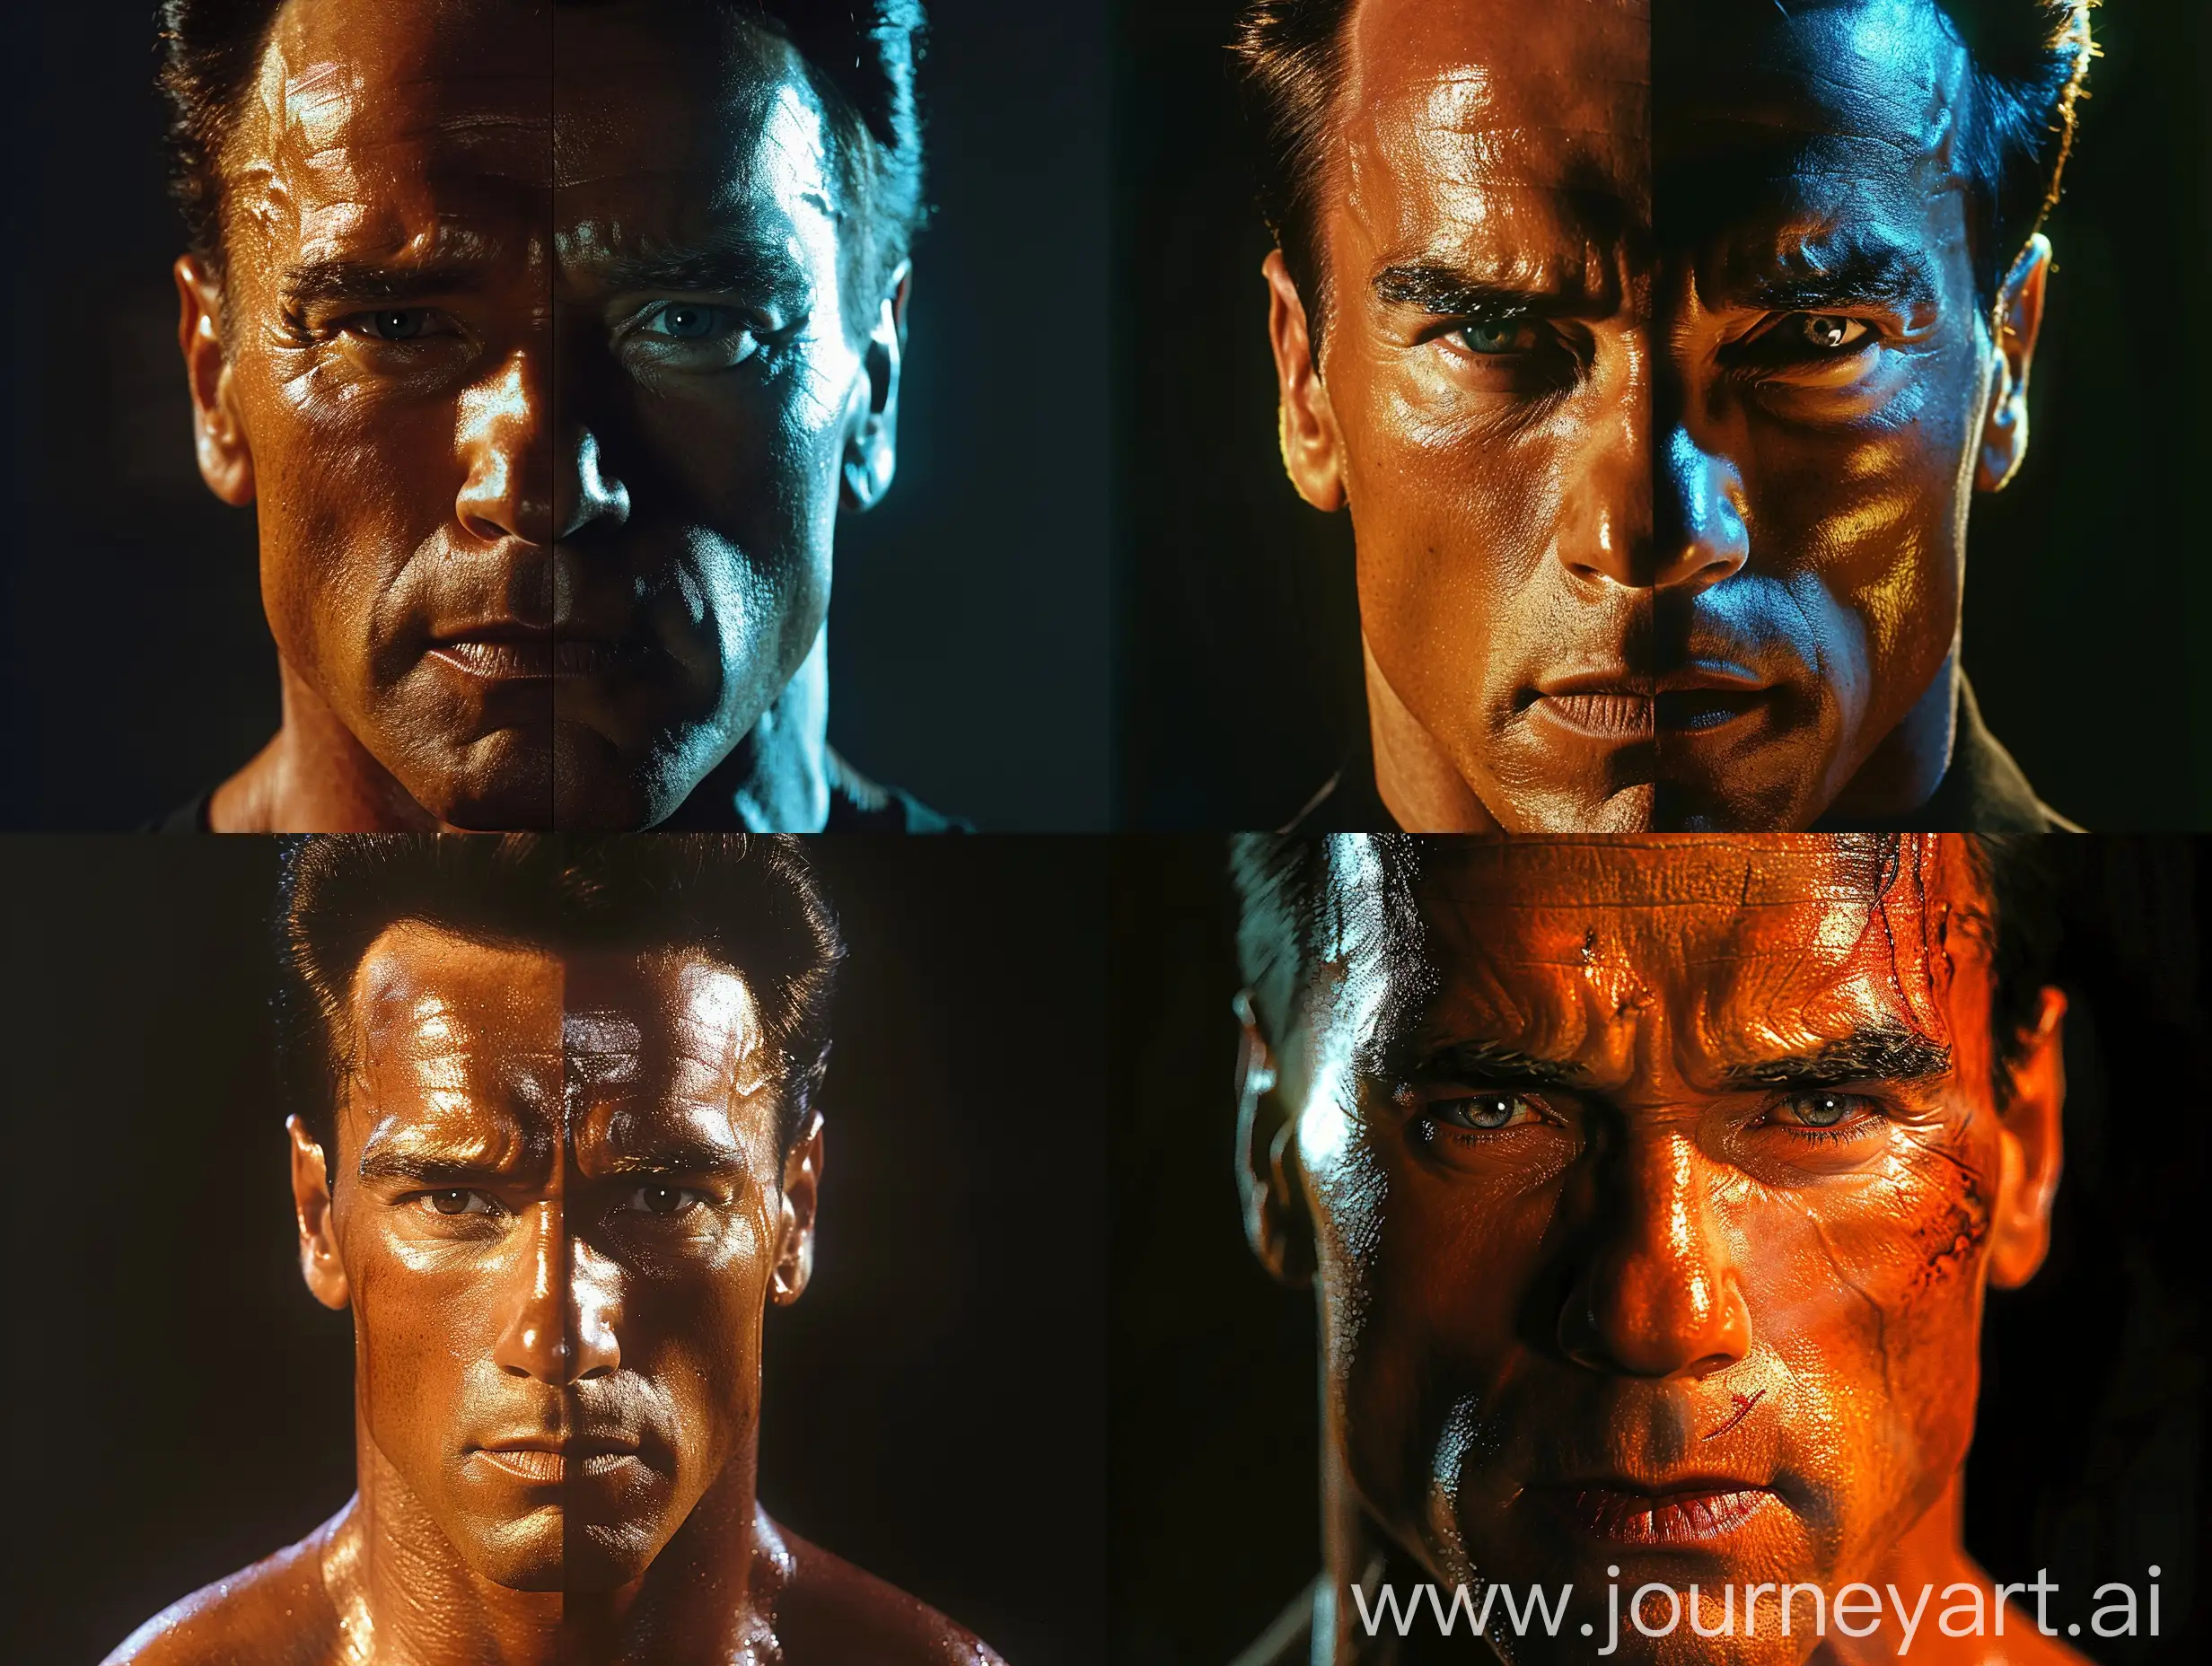 In this captivating thumbnail, Arnold Schwarzenegger stands at the crossroads of his own legend. On one side, he embodies the iconic hero—the chiseled physique, the unwavering determination, and the indomitable spirit that made him a household name. But turn your gaze, and there lies the shadow—the villainous alter ego lurking just beneath the surface. His eyes hold secrets, and the darkness whispers of sacrifices made, compromises struck, and the price of fame paid. The split composition reveals both facets: the charismatic savior and the enigmatic devil. Arnold’s face is half bathed in golden light, while the other half fades into obscurity, hinting at the hidden struggles and moral complexities that fame brings. No text needed; the duality speaks for itself.
